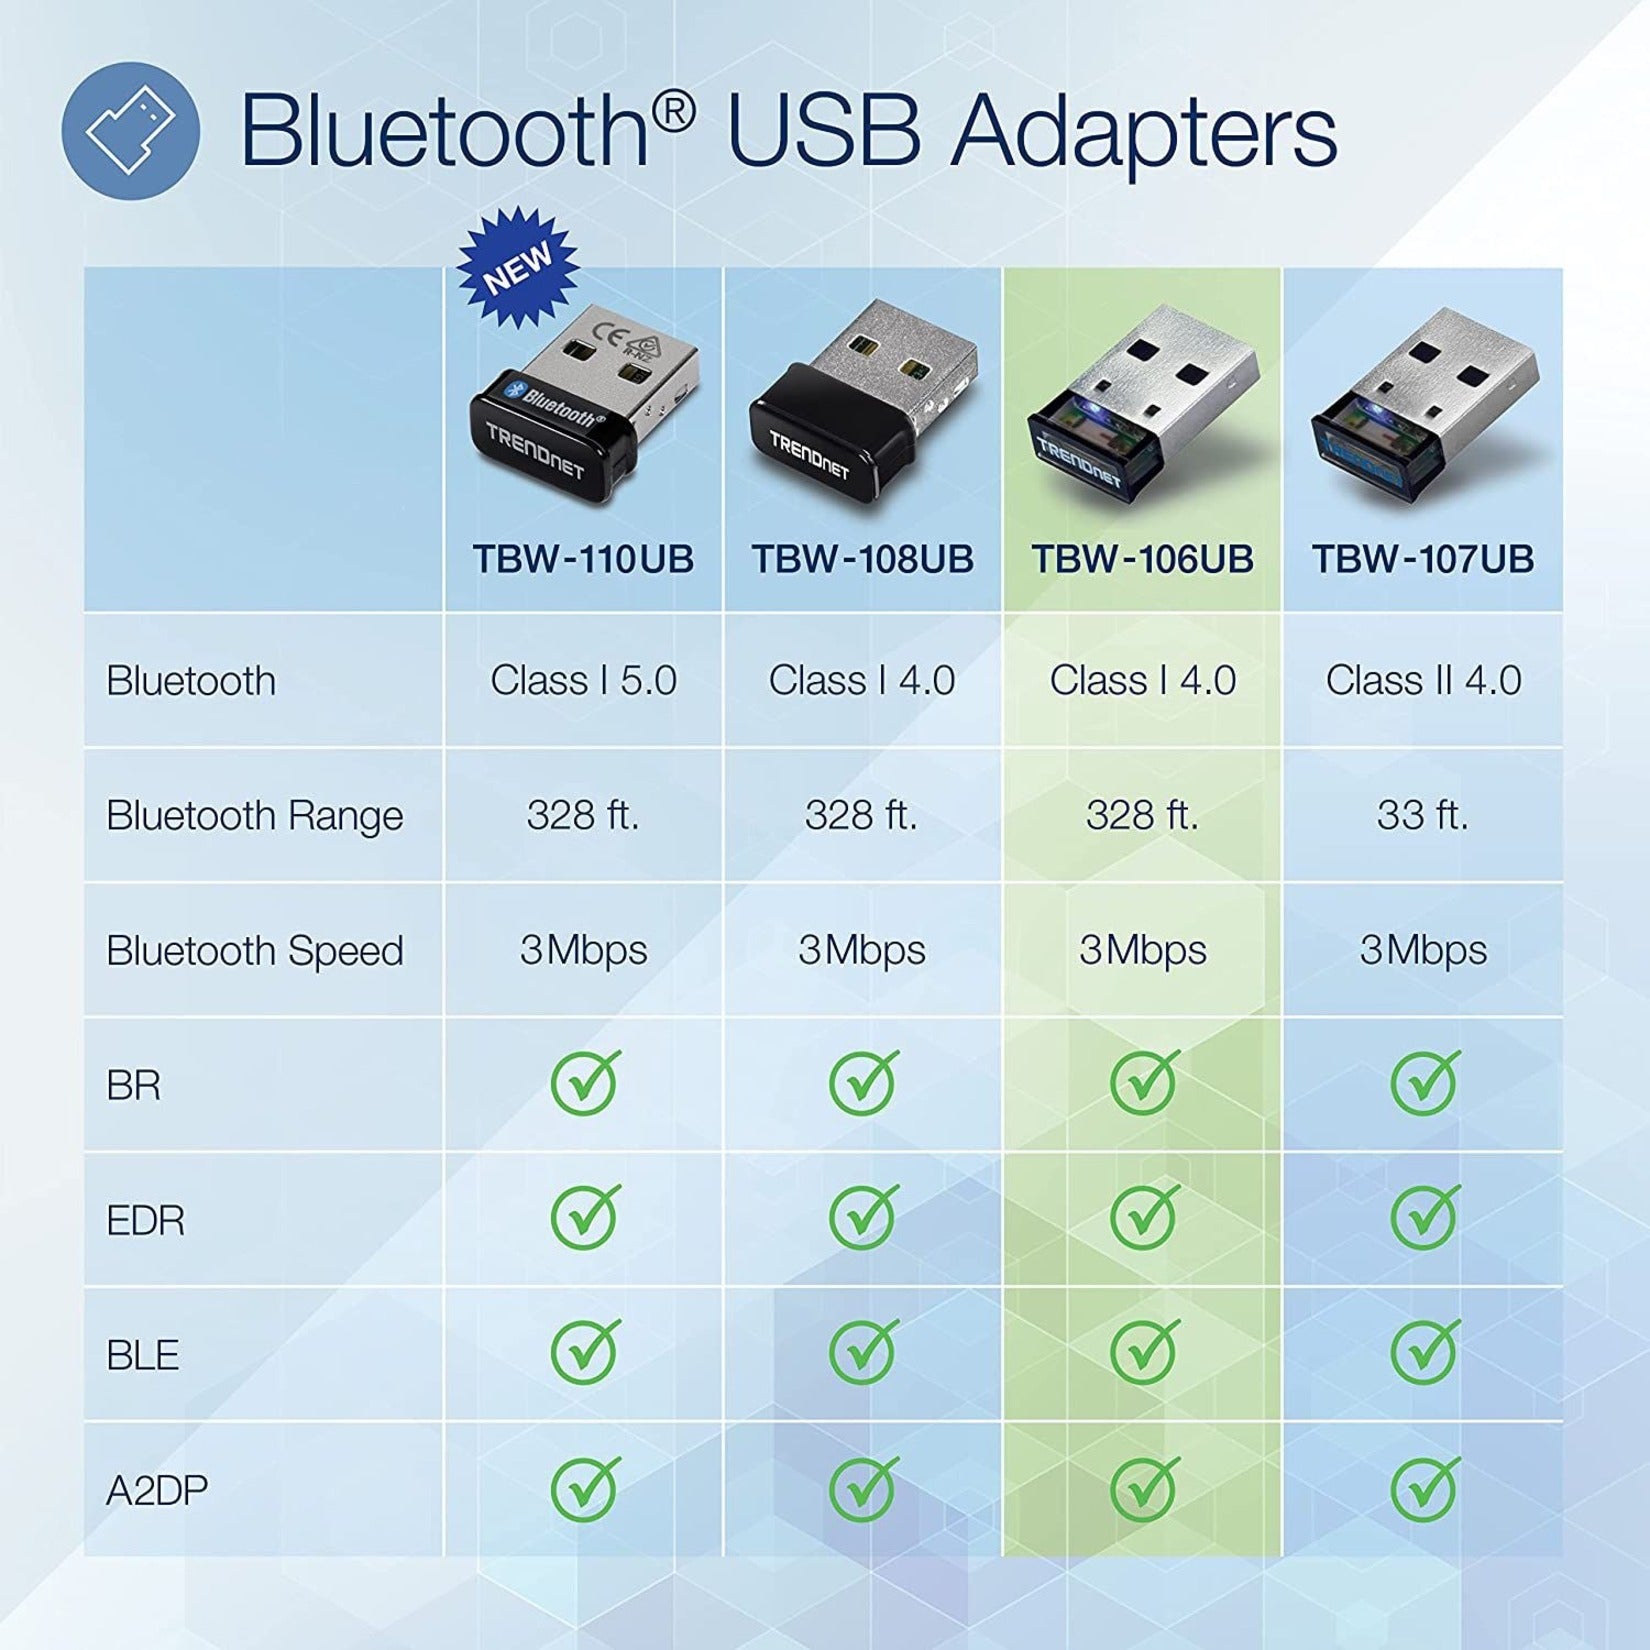 TRENDnet TBW-106UB Micro Bluetooth USB Adapter, Long Range up to 100 Meters, Compatible with Windows and Stereo Headsets